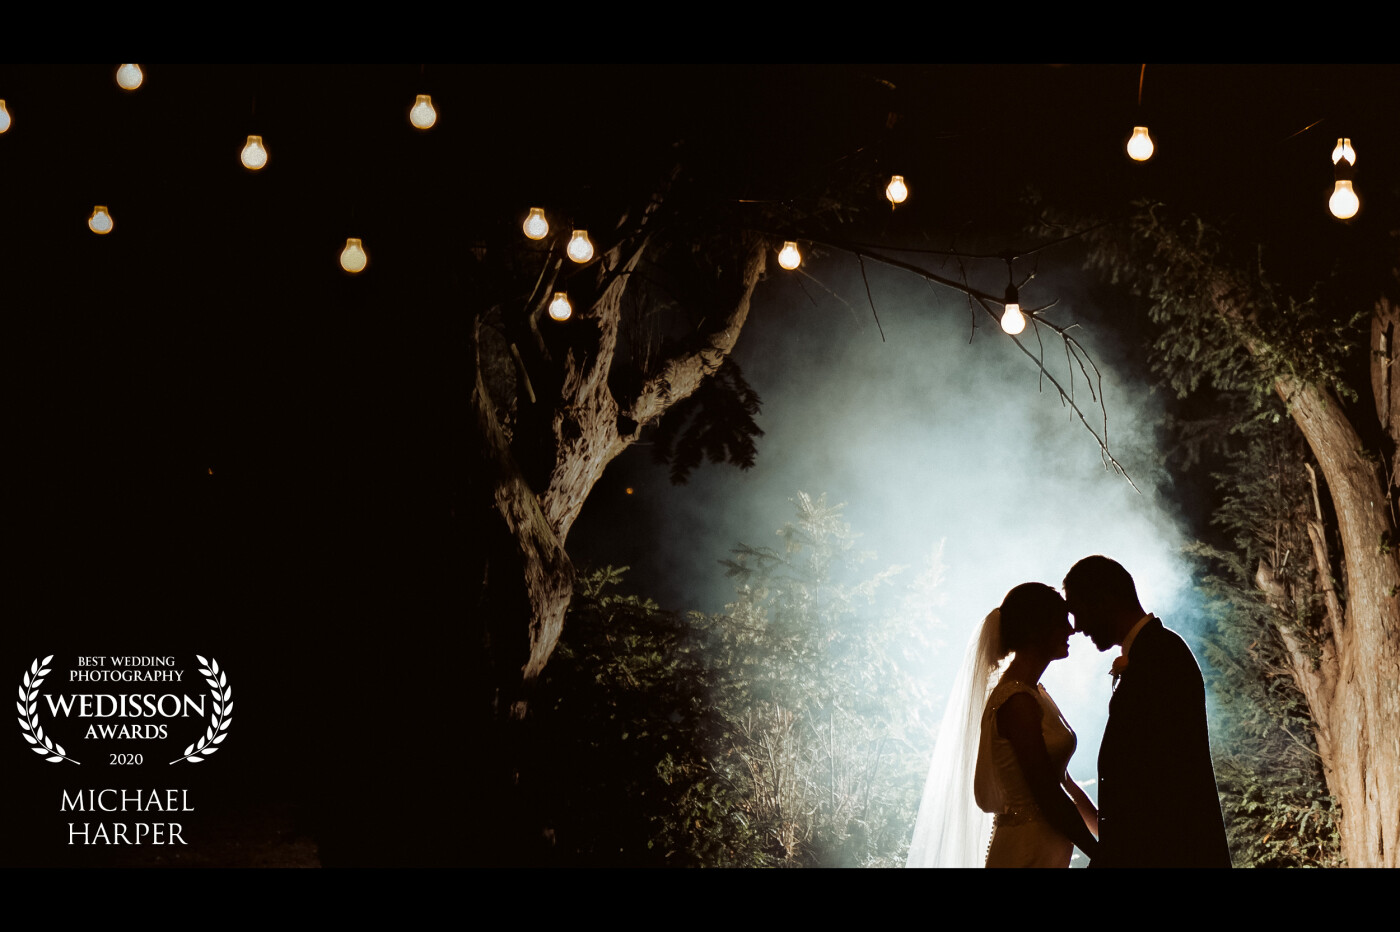 Captured at Wrenbury Hall at the end of the evening as their last photo. Using the hanging lights as an ambient feature a flash was positioned behind the couple to create a silhouette and light up the trees a little. To finish the scene white smoke was introduced to add some drama to the image.